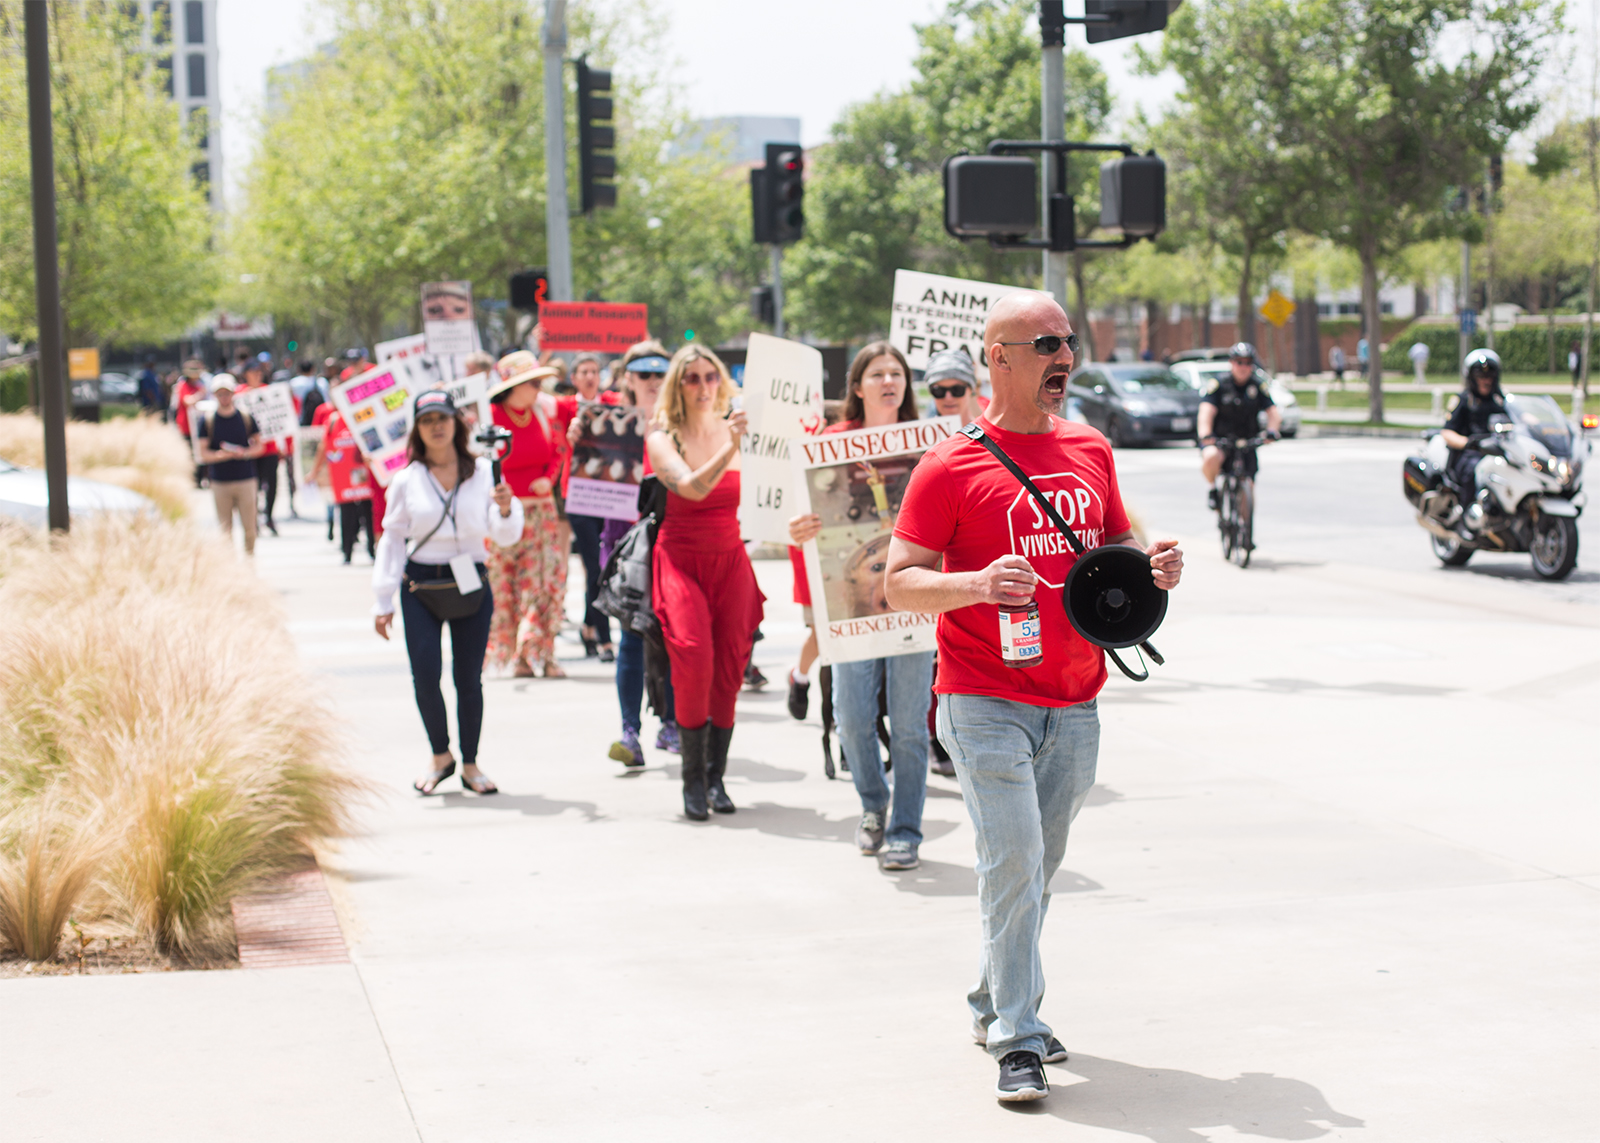 Activists march through Westwood and UCLA to protest animal experimentation  - Daily Bruin